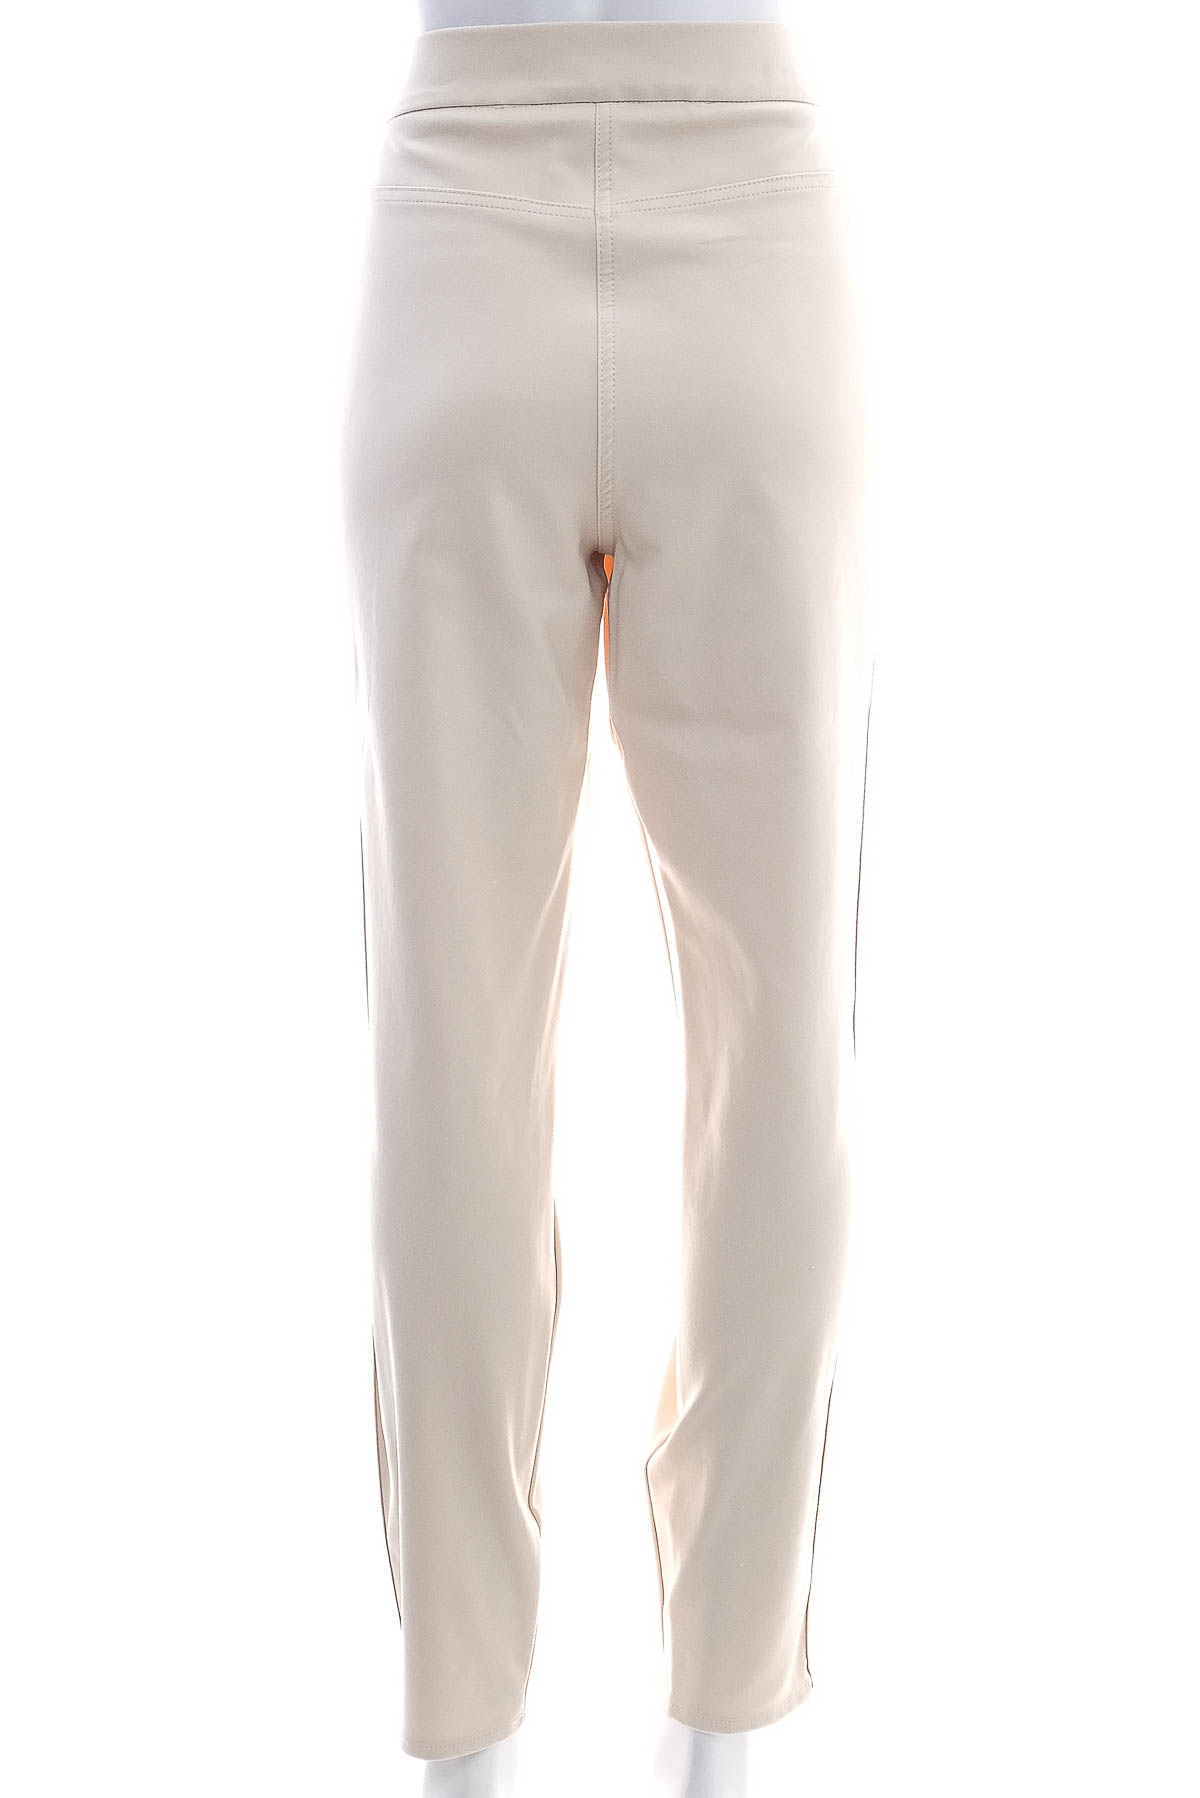 Women's trousers - THOM BY THOMAS RATH - 1